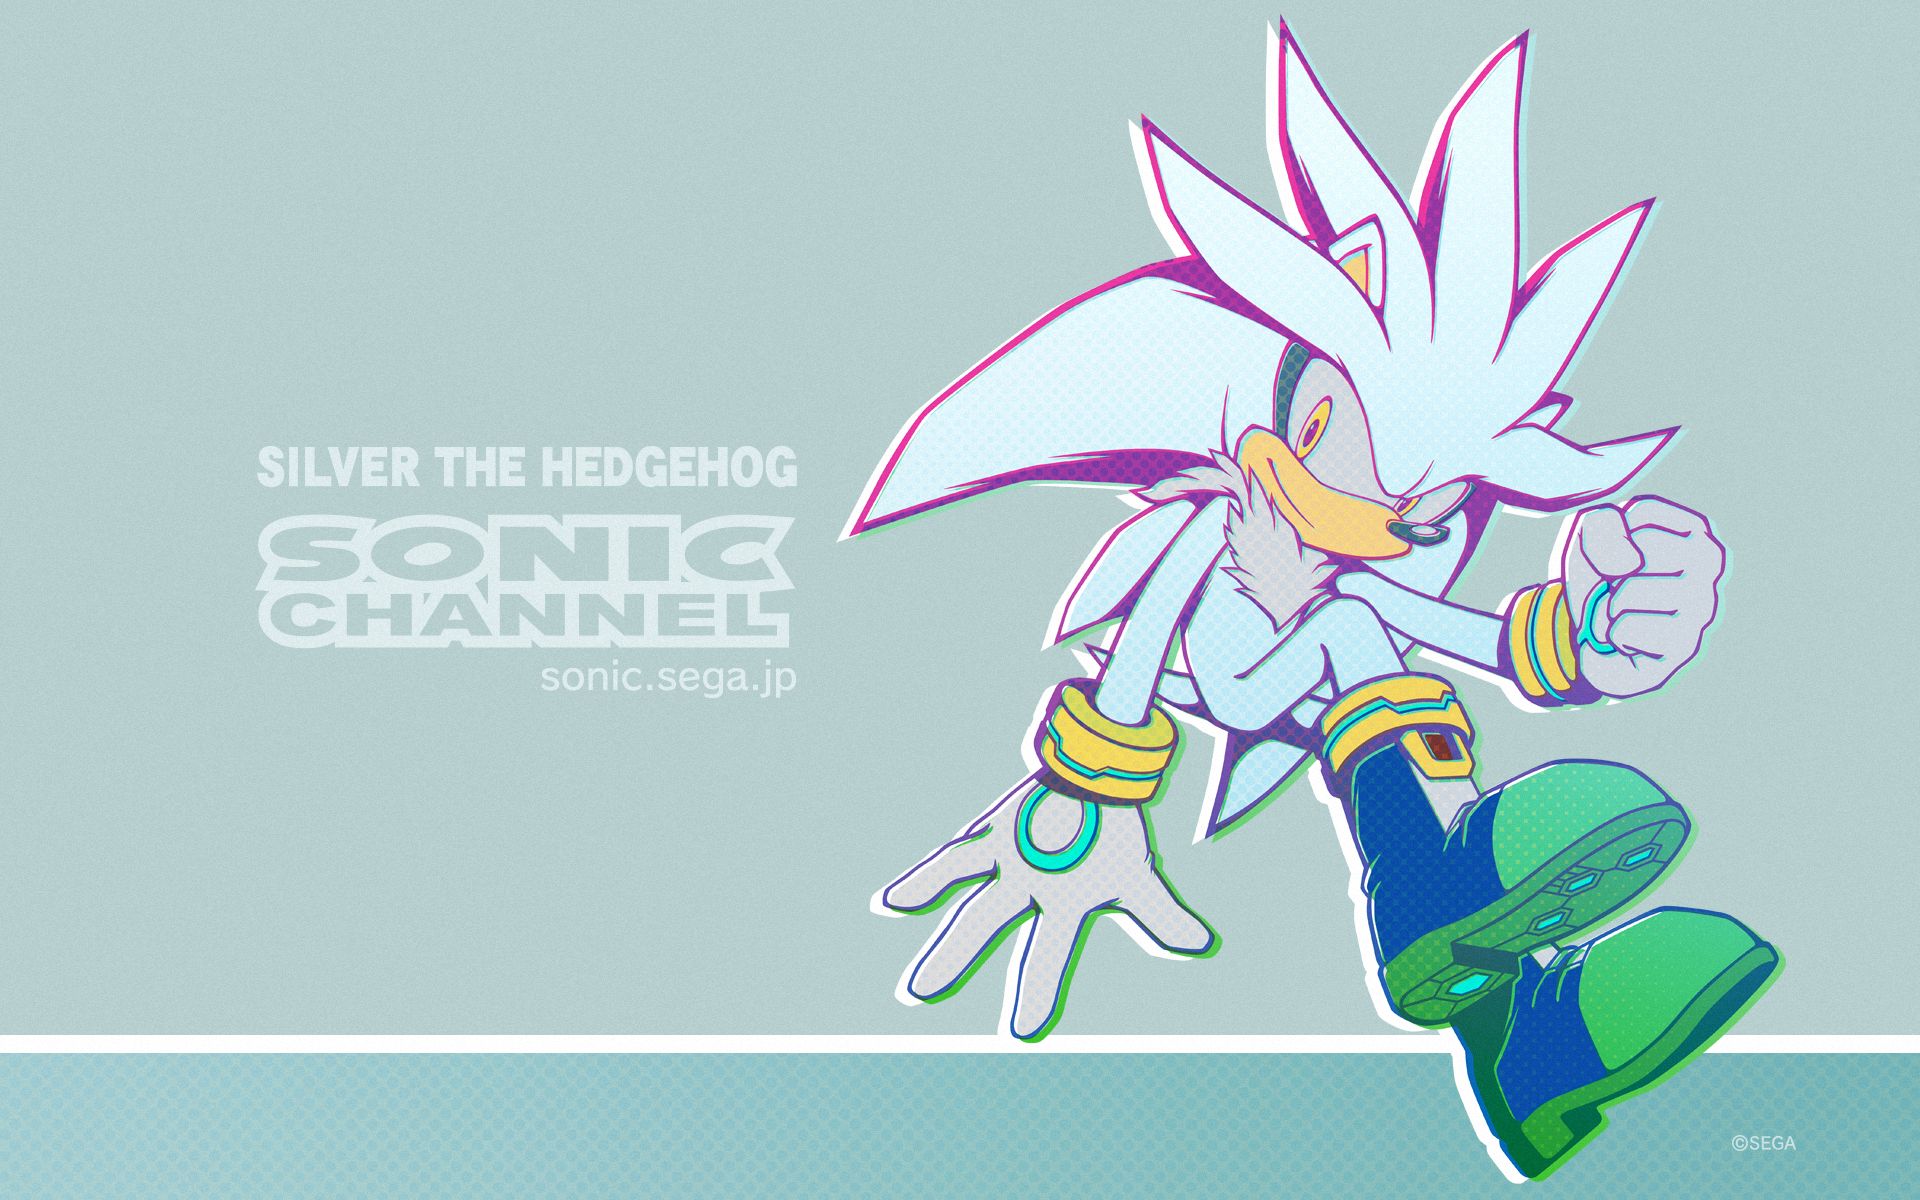 video game, sonic the hedgehog, boots, silver the hedgehog, sonic channel, sonic